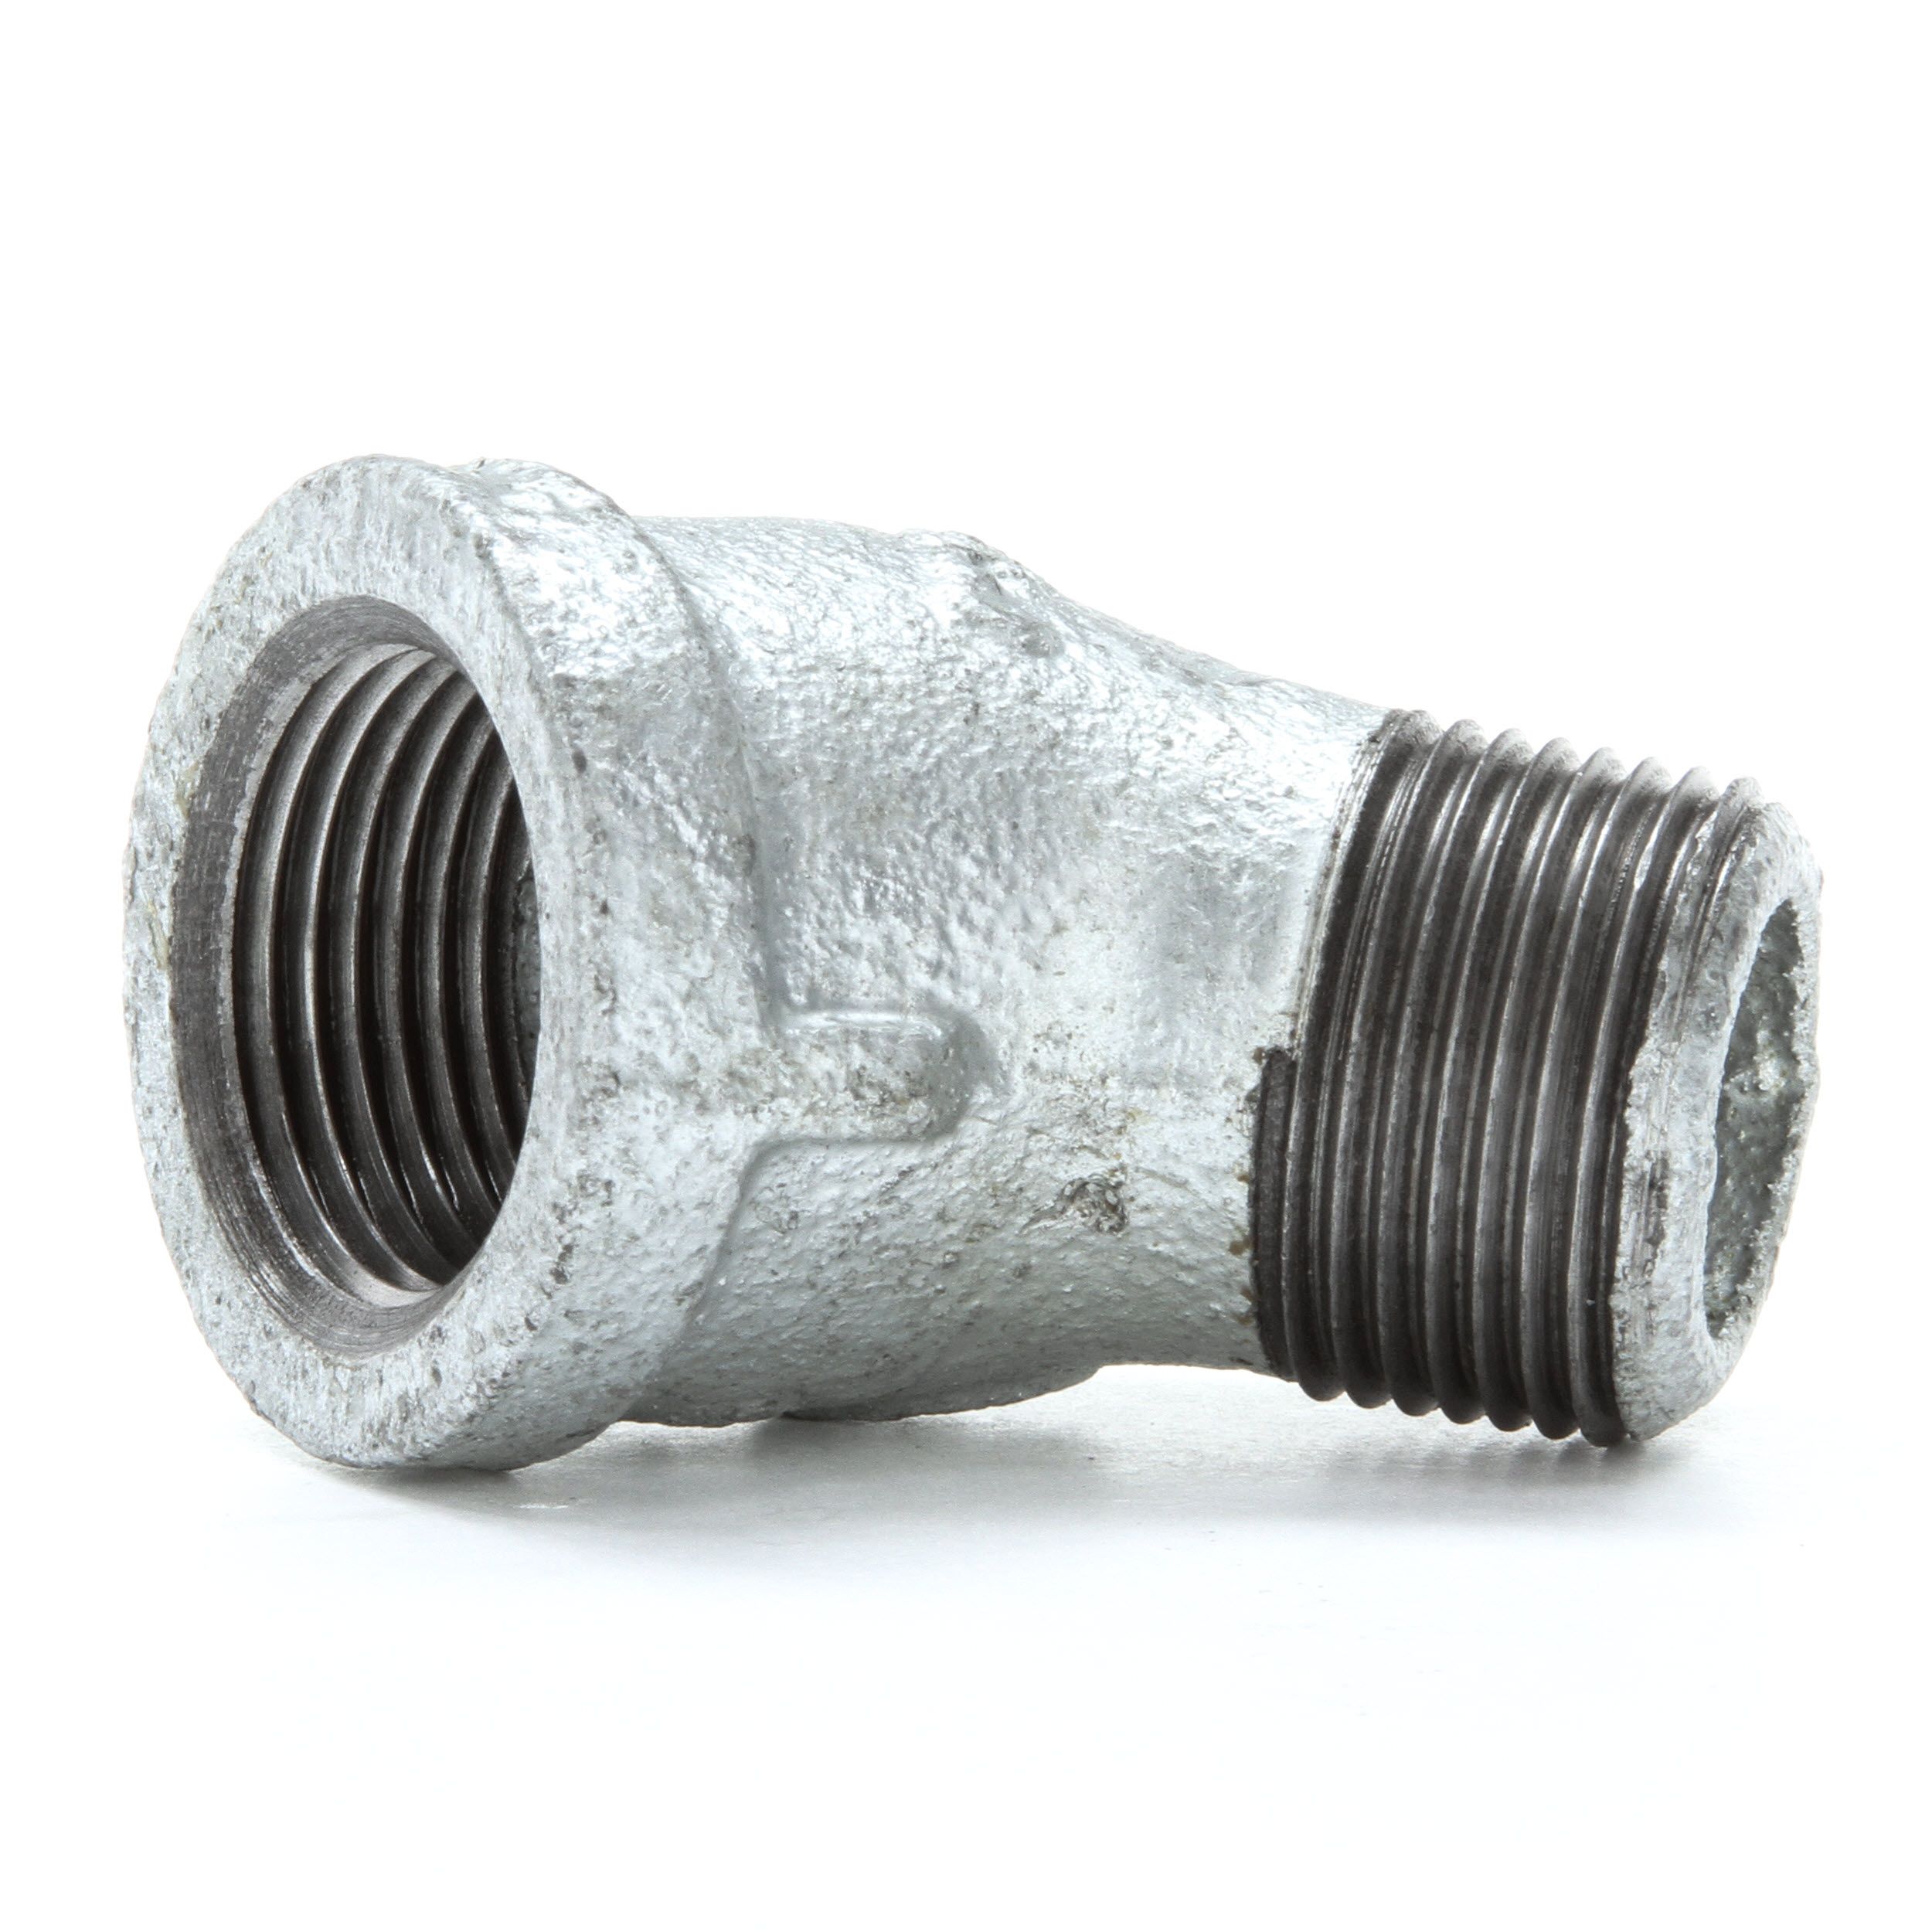 ID 1" Details about   3/4" 45° Elbow Pipe Fitting 